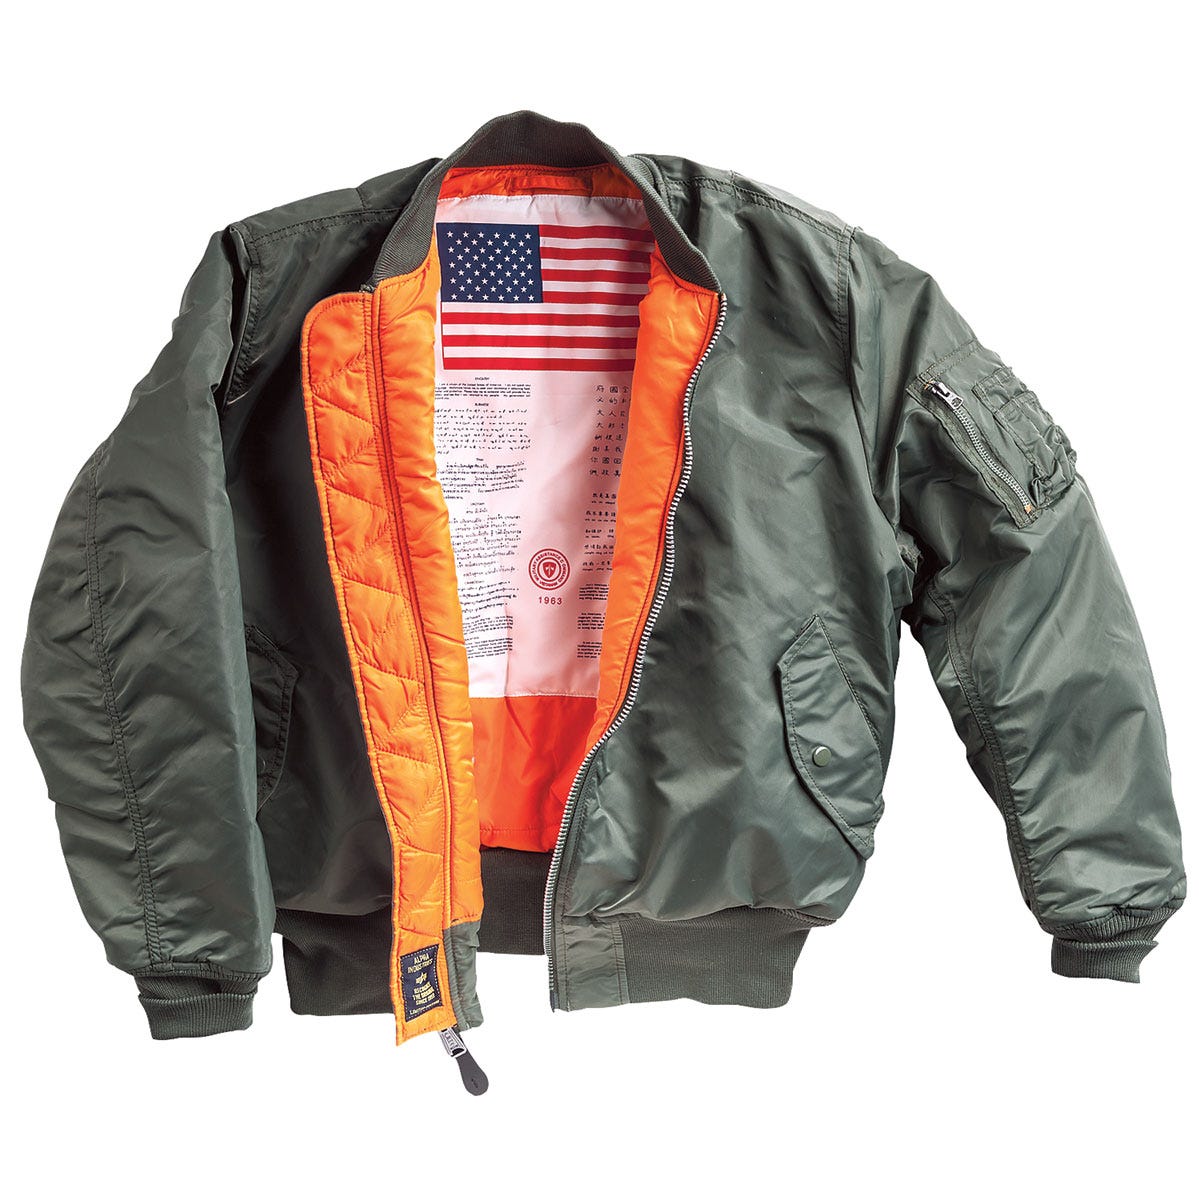 MA-1 Flight Jacket with Blood Chit - from Sporty's Pilot Shop